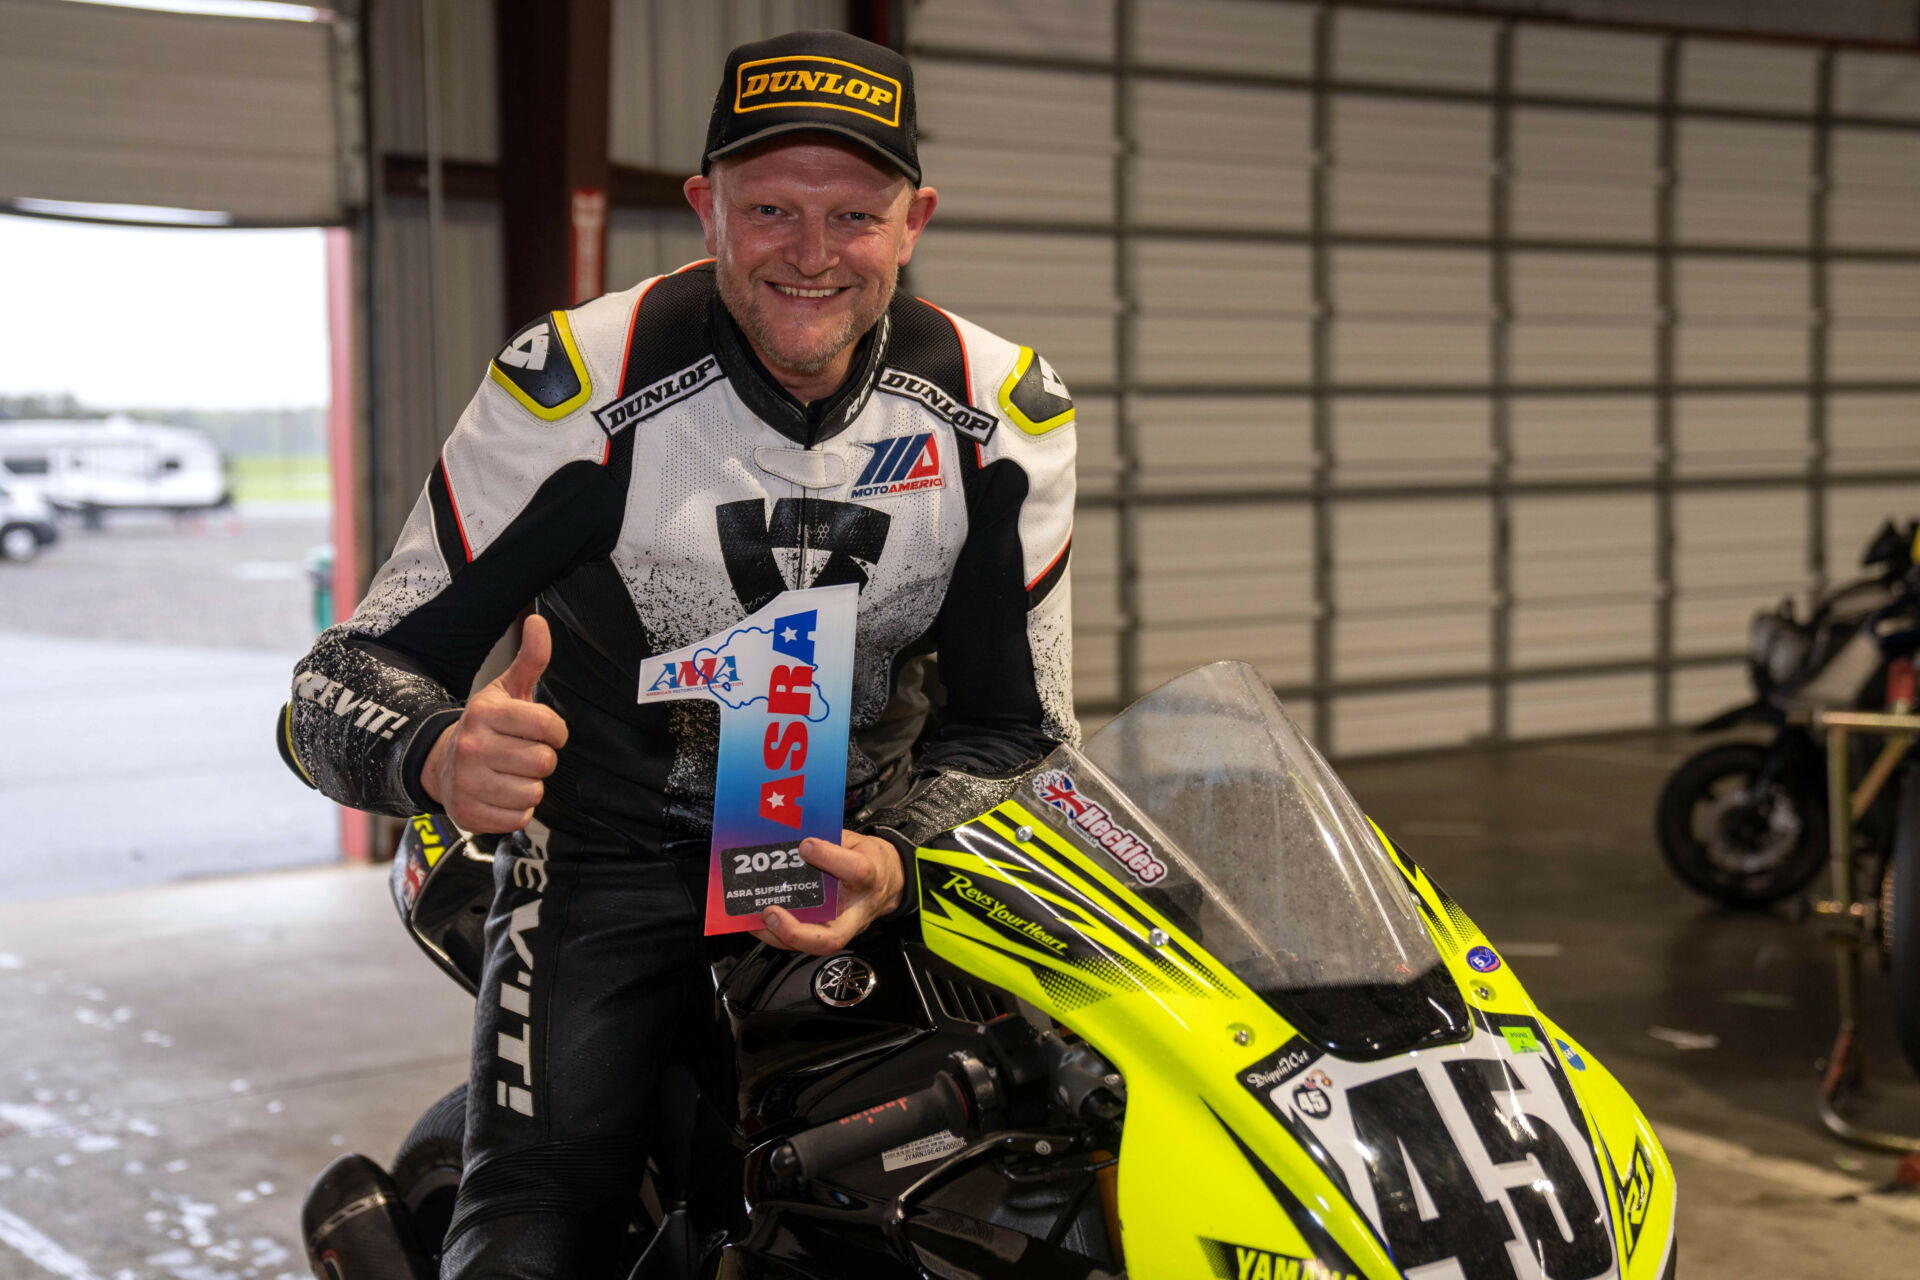 Mark Heckles poses with his trophy for winning the ASRA Superstock race at New Jersey Motorsports Park. Photo by Mark Lienhard, courtesy ASRA.